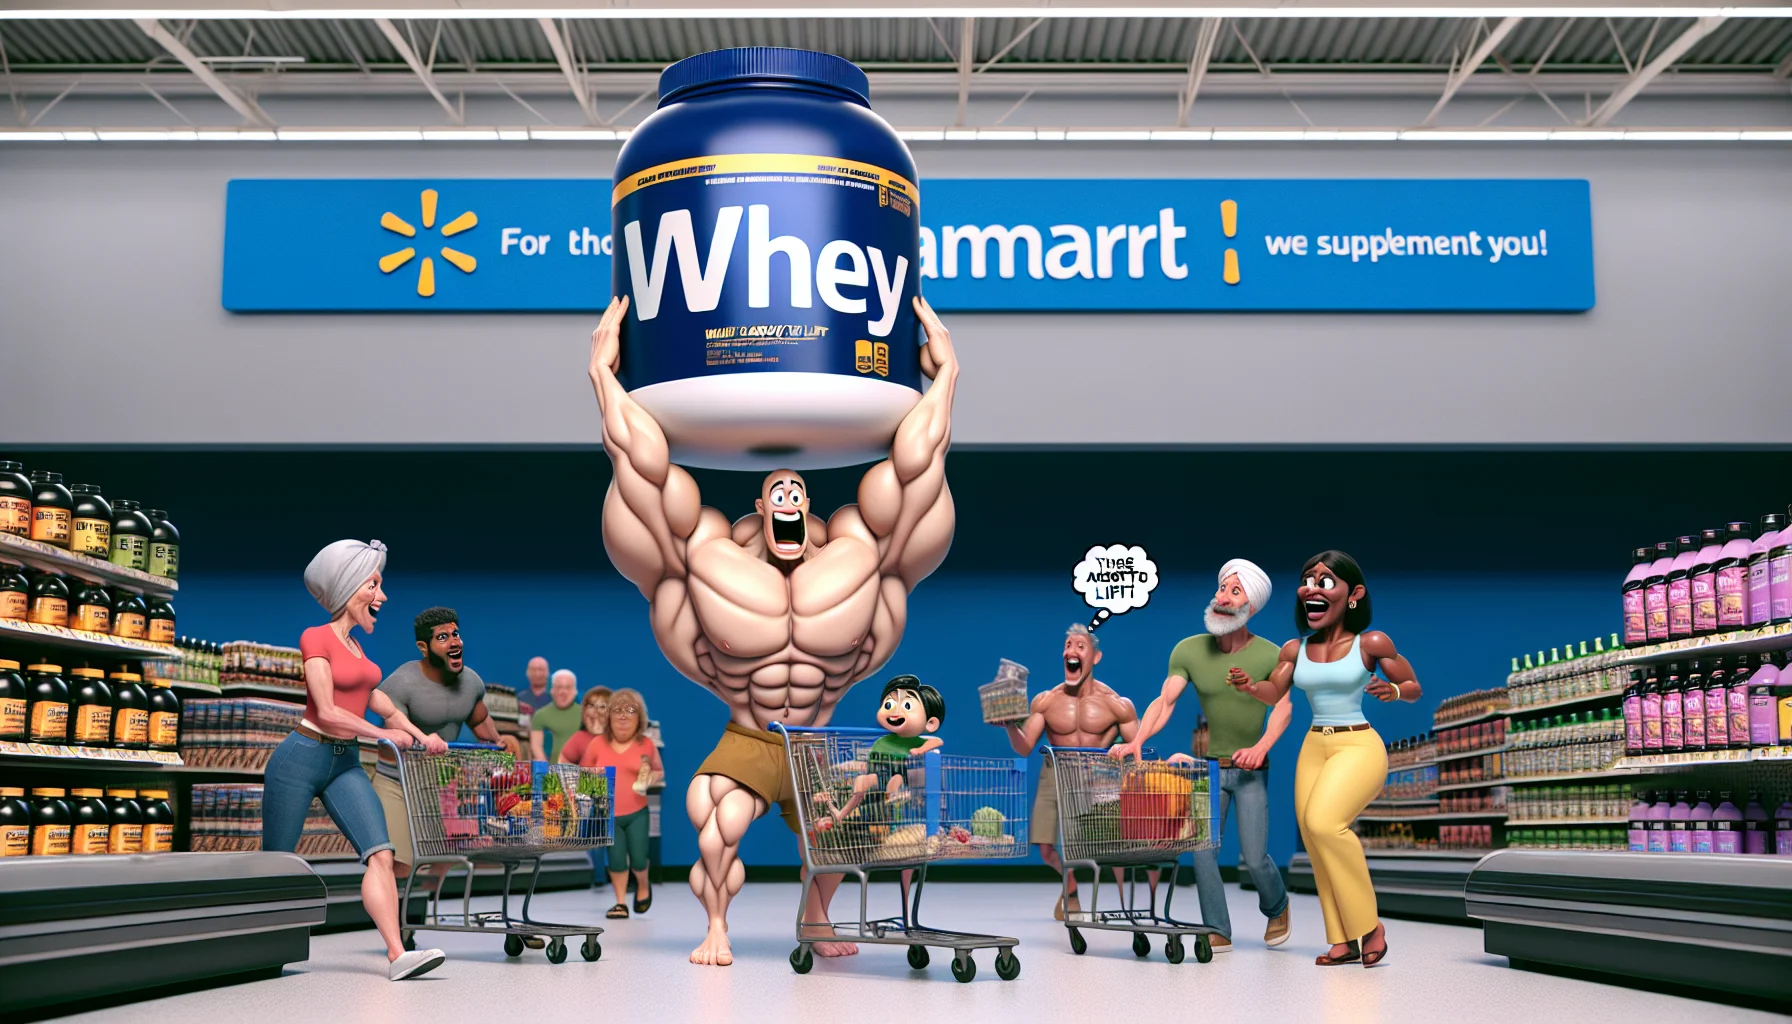 Render a humorous scene situated in a general supermarket setting, signifying to be Walmart without using any logos or proprietary names. Within the scene, display an oversized, cartoonish jug of whey protein that has sprouted human-like muscular arms and legs. The protein jug is energetically assisting different customers with their shopping, for instance, by lifting heavy groceries or sprinting through aisles to fetch products. The customers, who are of diverse descents like Caucasian, Middle-Eastern, South Asian, and Hispanic, and varied genders, express surprise but also admiration. A thought bubble over the protein jug reads: 'For those about to lift, we supplement you!'.